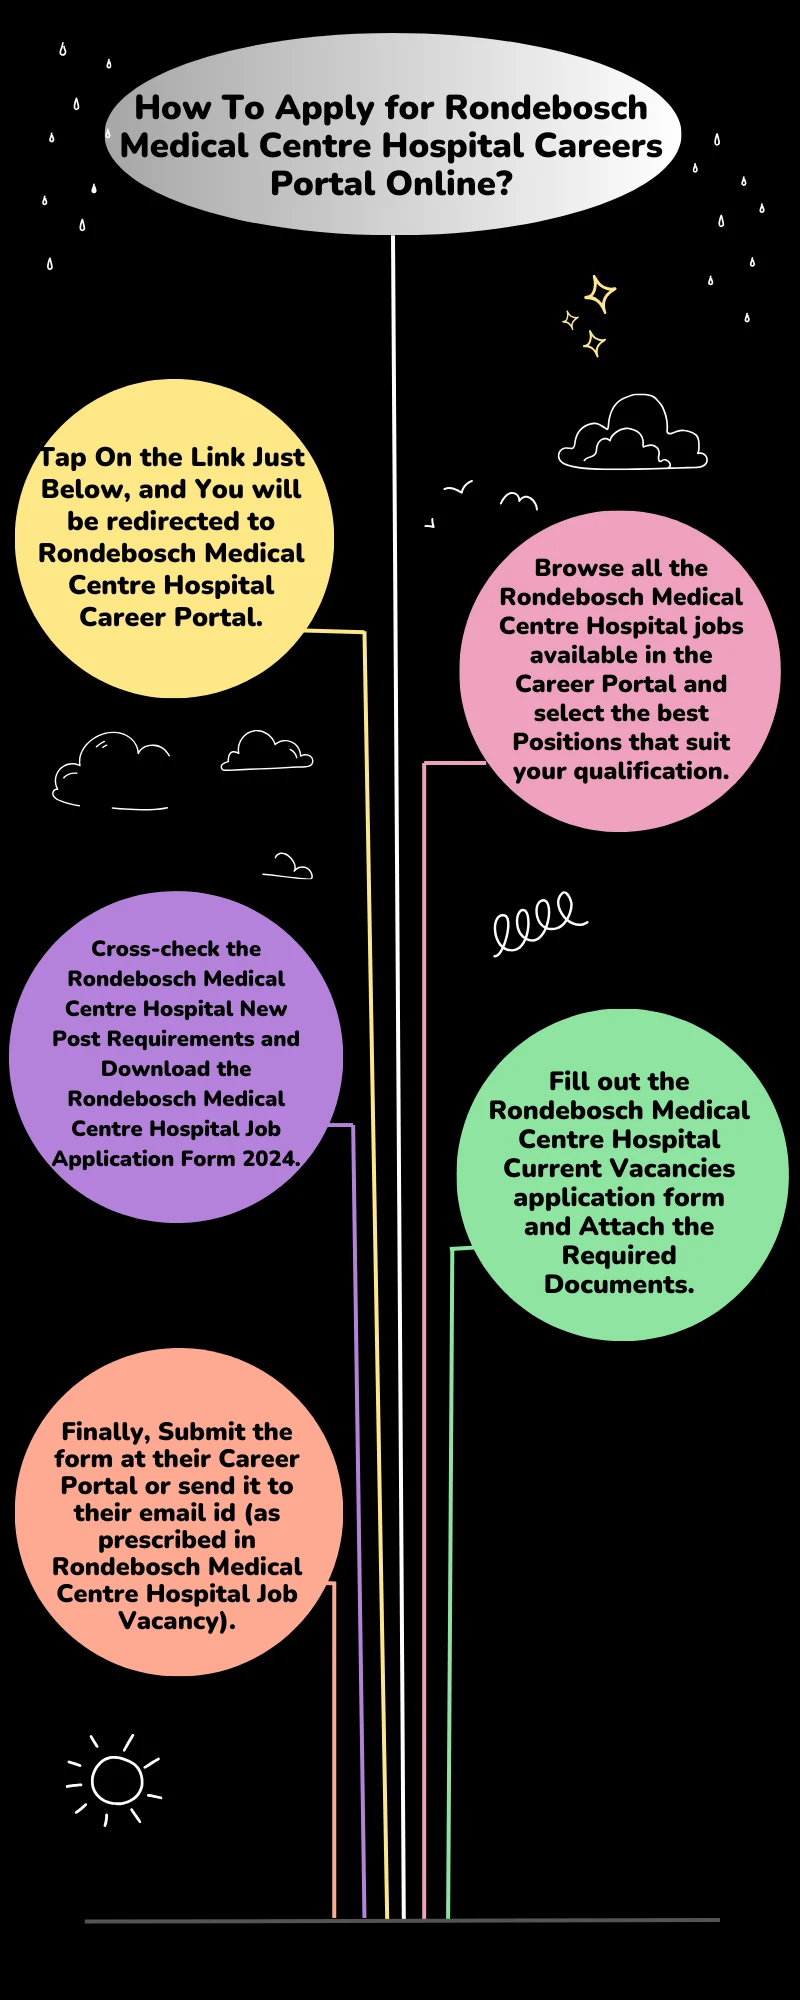 How To Apply for Rondebosch Medical Centre Hospital Careers Portal Online?